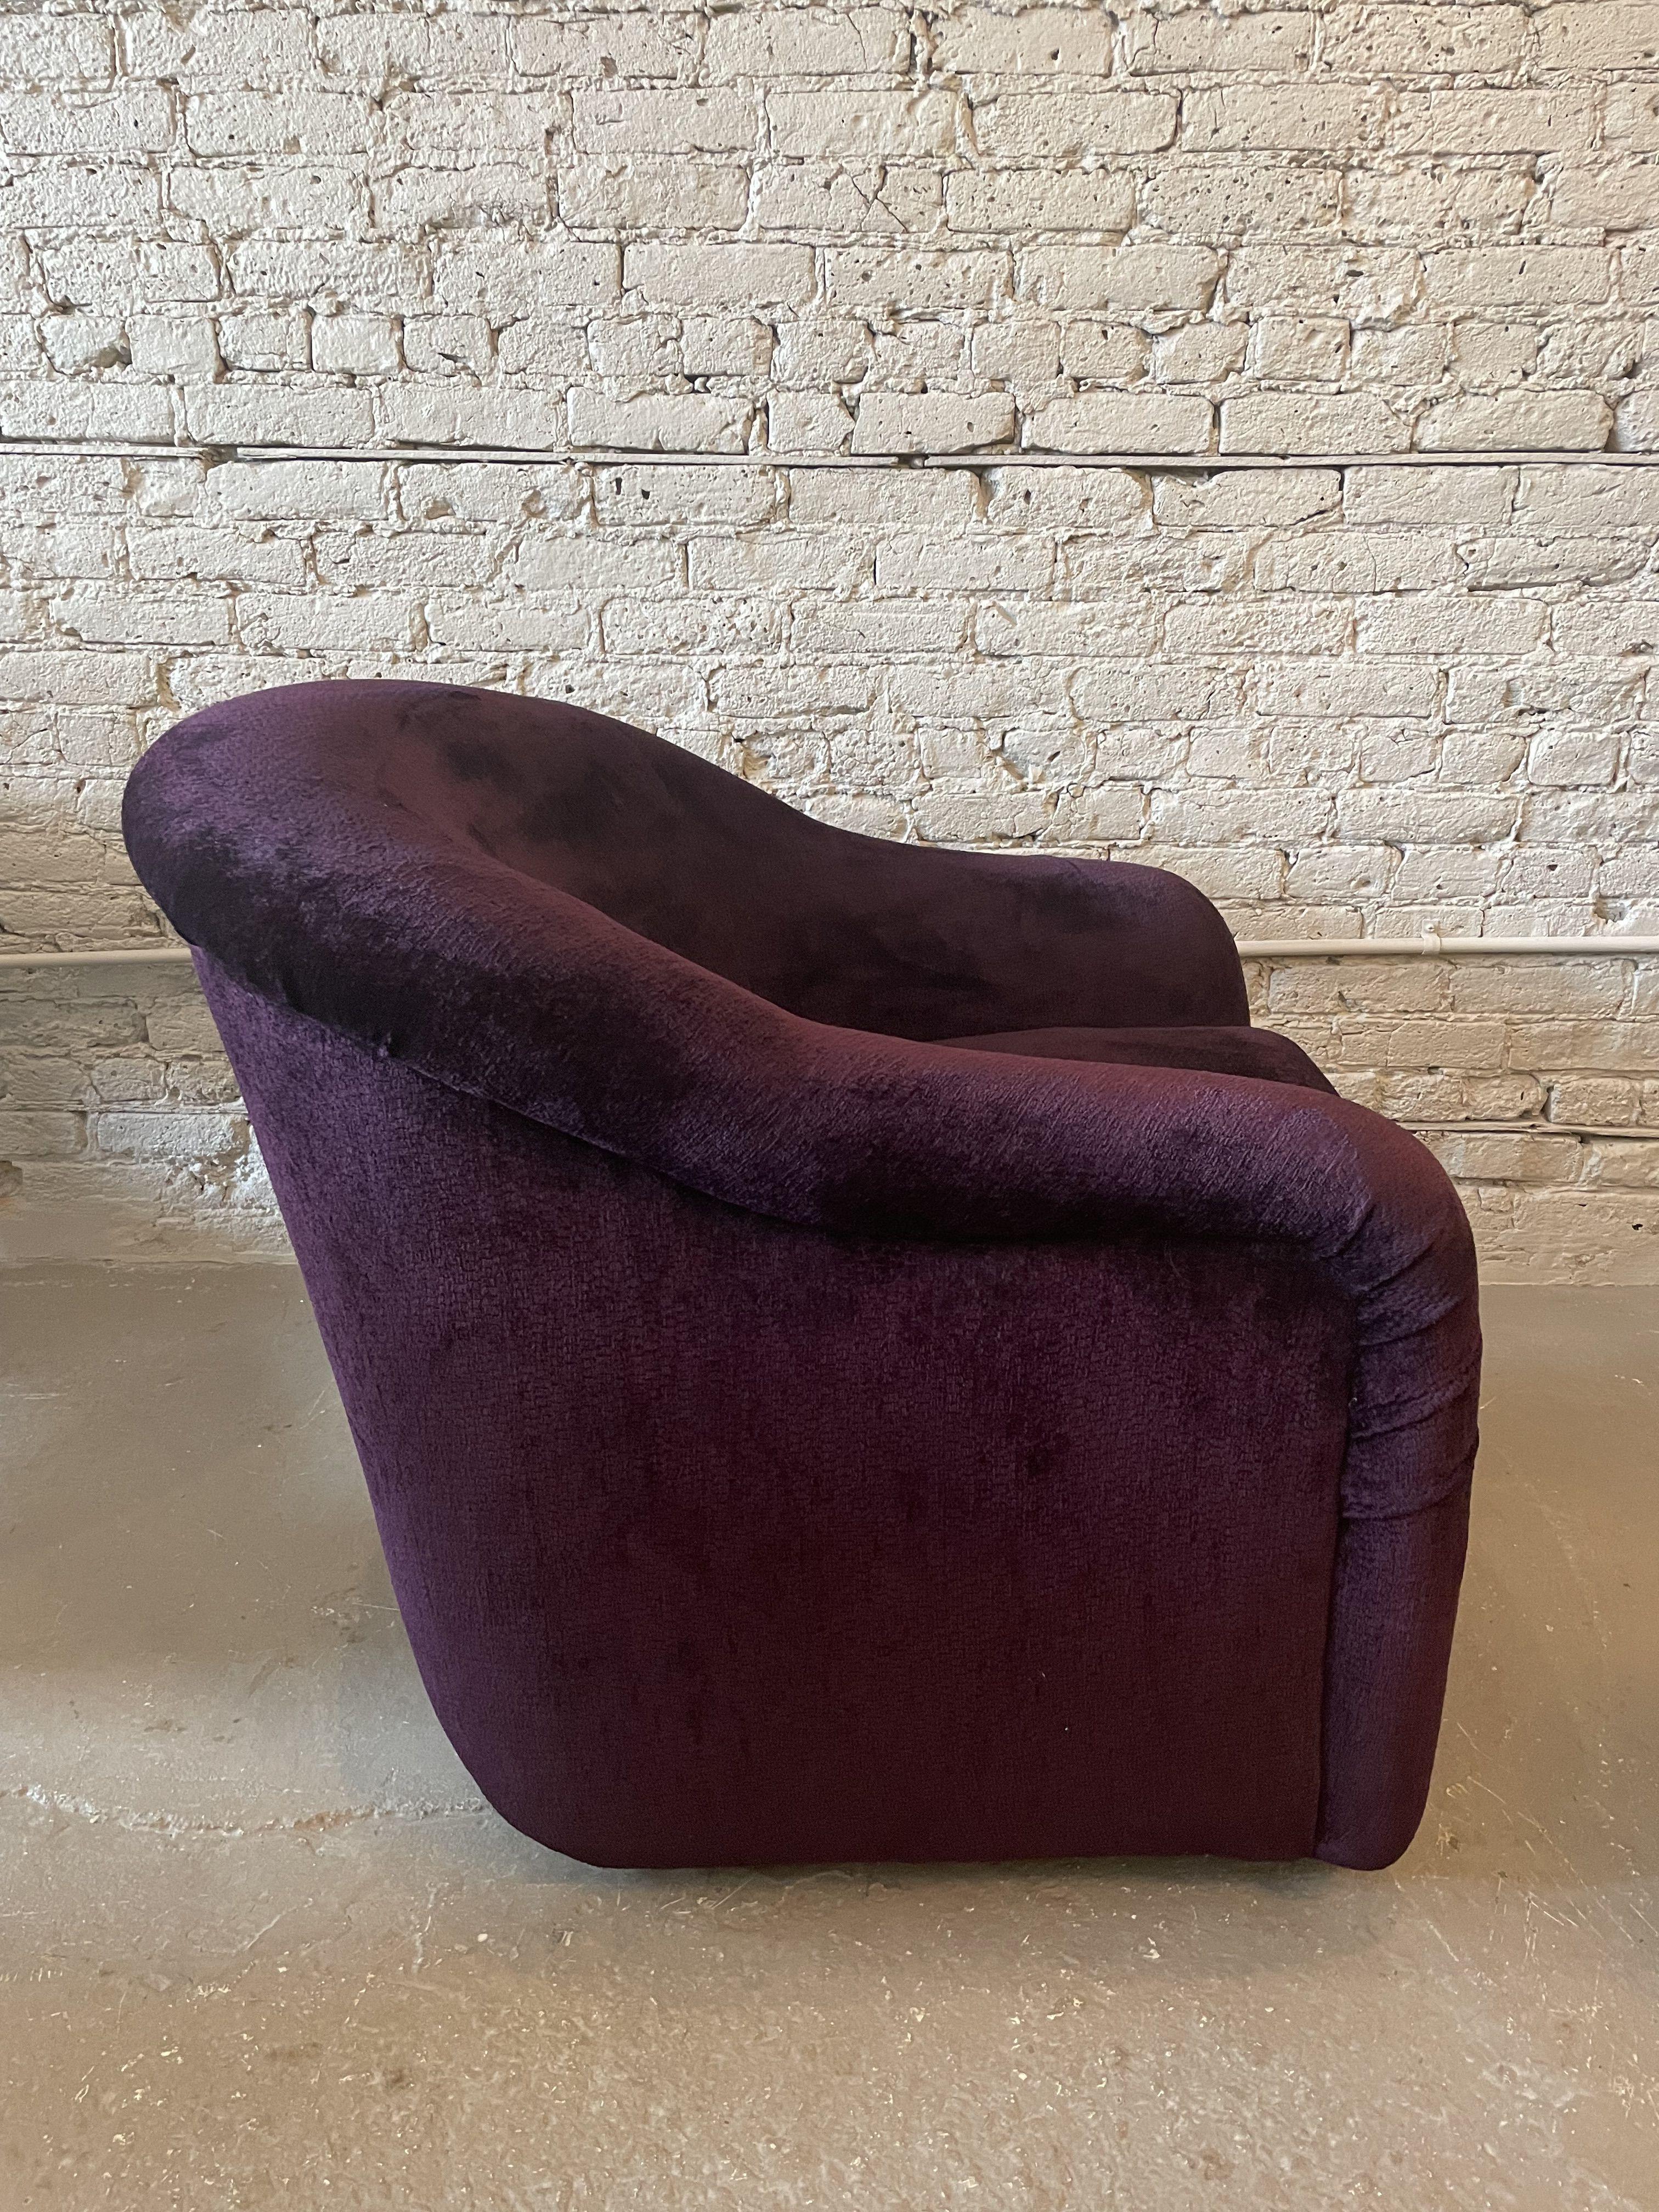 Vintage A Rudin Swivel Chairs 1